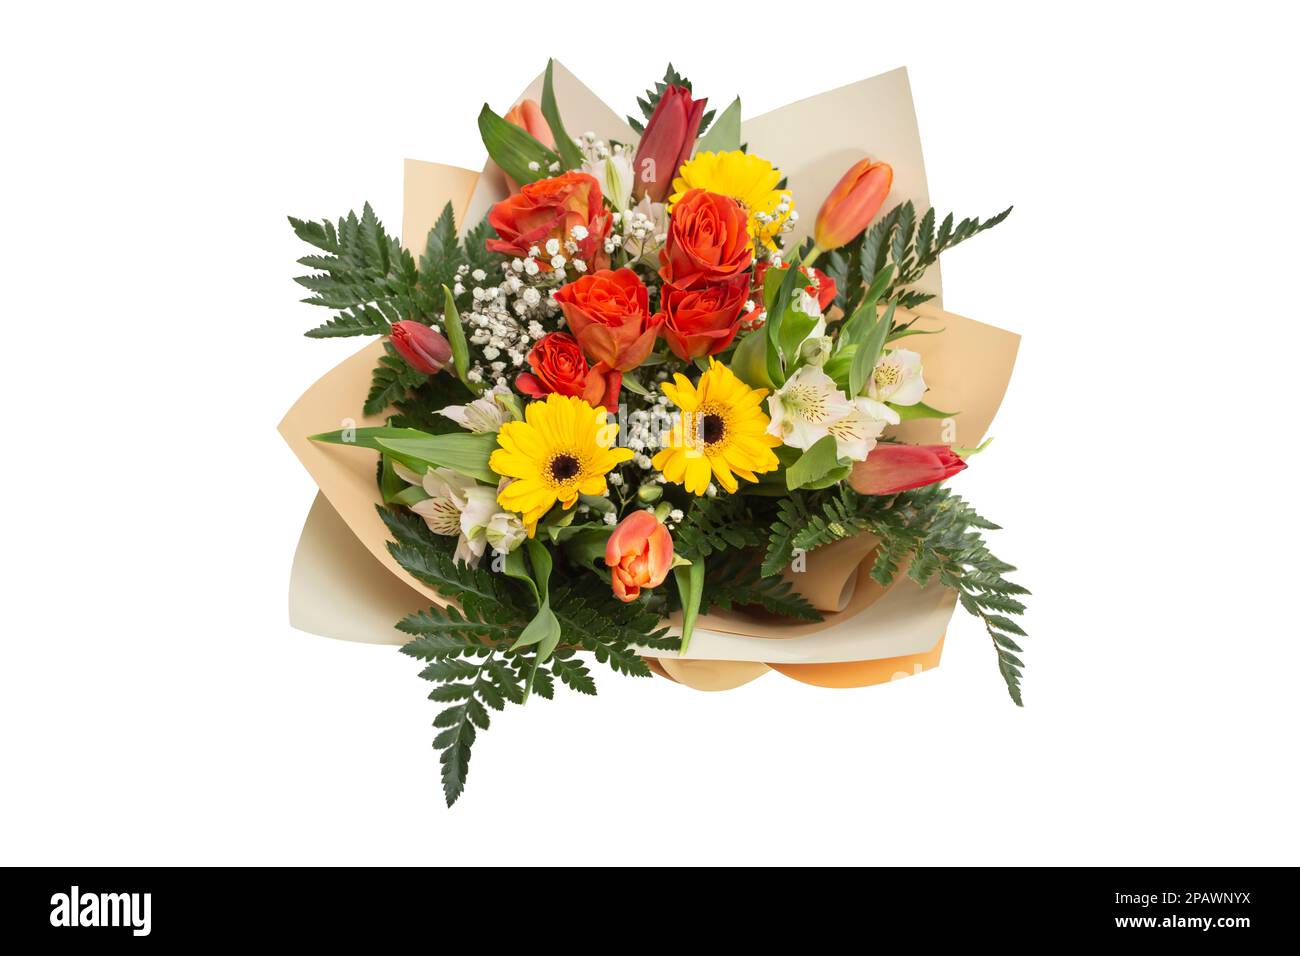 Multicolor flowers bouquet with  tulips, roses, Alstroemeria, daisies and fern leaves isolated on white Stock Photo